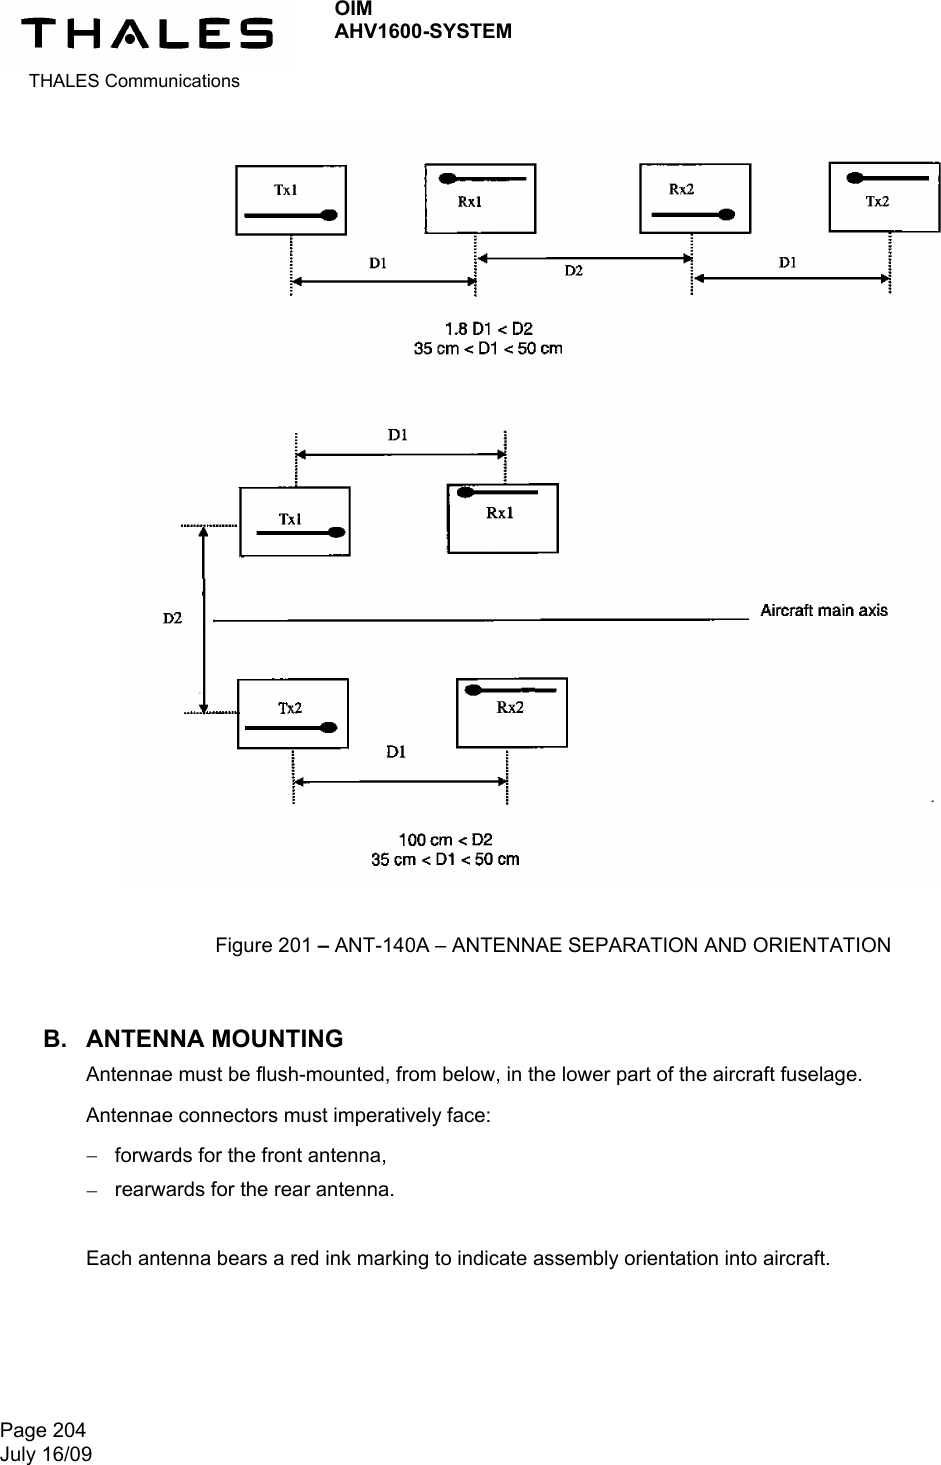  THALES Communications OIM AHV1600-SYSTEM   Page 204 July 16/09                                      B. ANTENNA MOUNTING Antennae must be flush-mounted, from below, in the lower part of the aircraft fuselage. Antennae connectors must imperatively face:  forwards for the front antenna,  rearwards for the rear antenna.  Each antenna bears a red ink marking to indicate assembly orientation into aircraft.  Figure 201 – ANT-140A – ANTENNAE SEPARATION AND ORIENTATION 